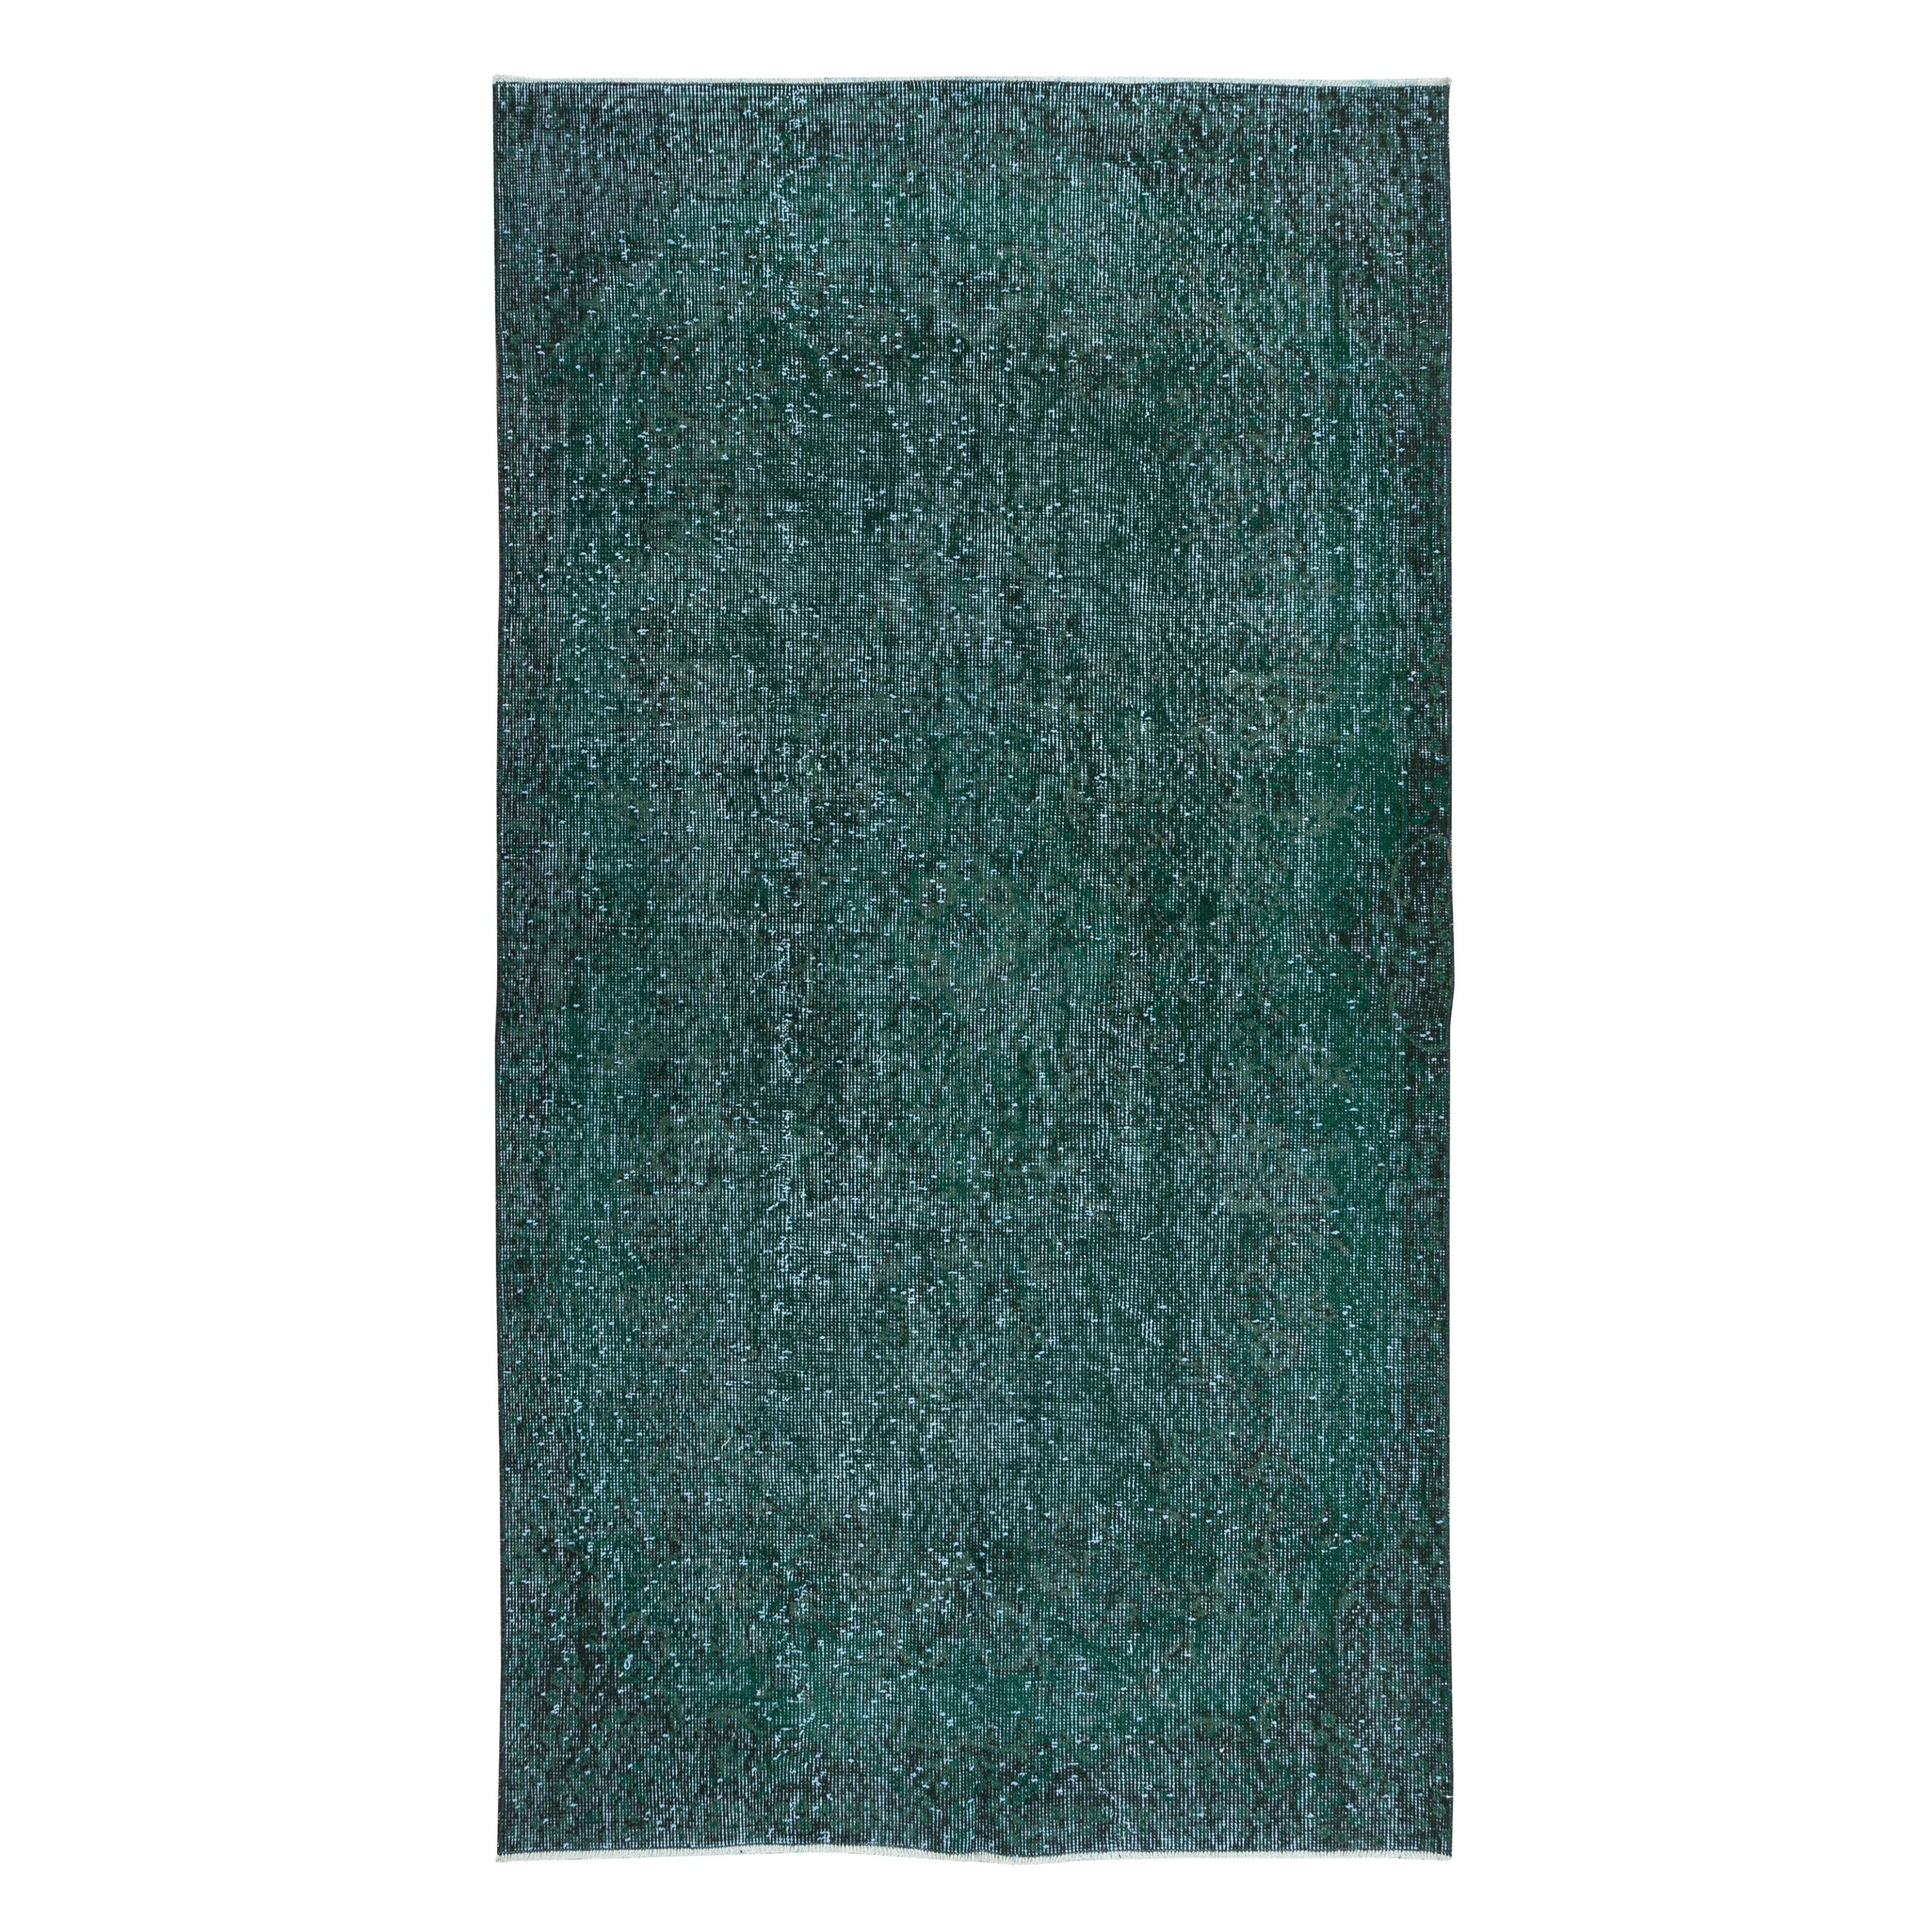 3.8x7 Ft Vintage Green Accent Rug, Handwoven and Handknotted in Turkey For Sale